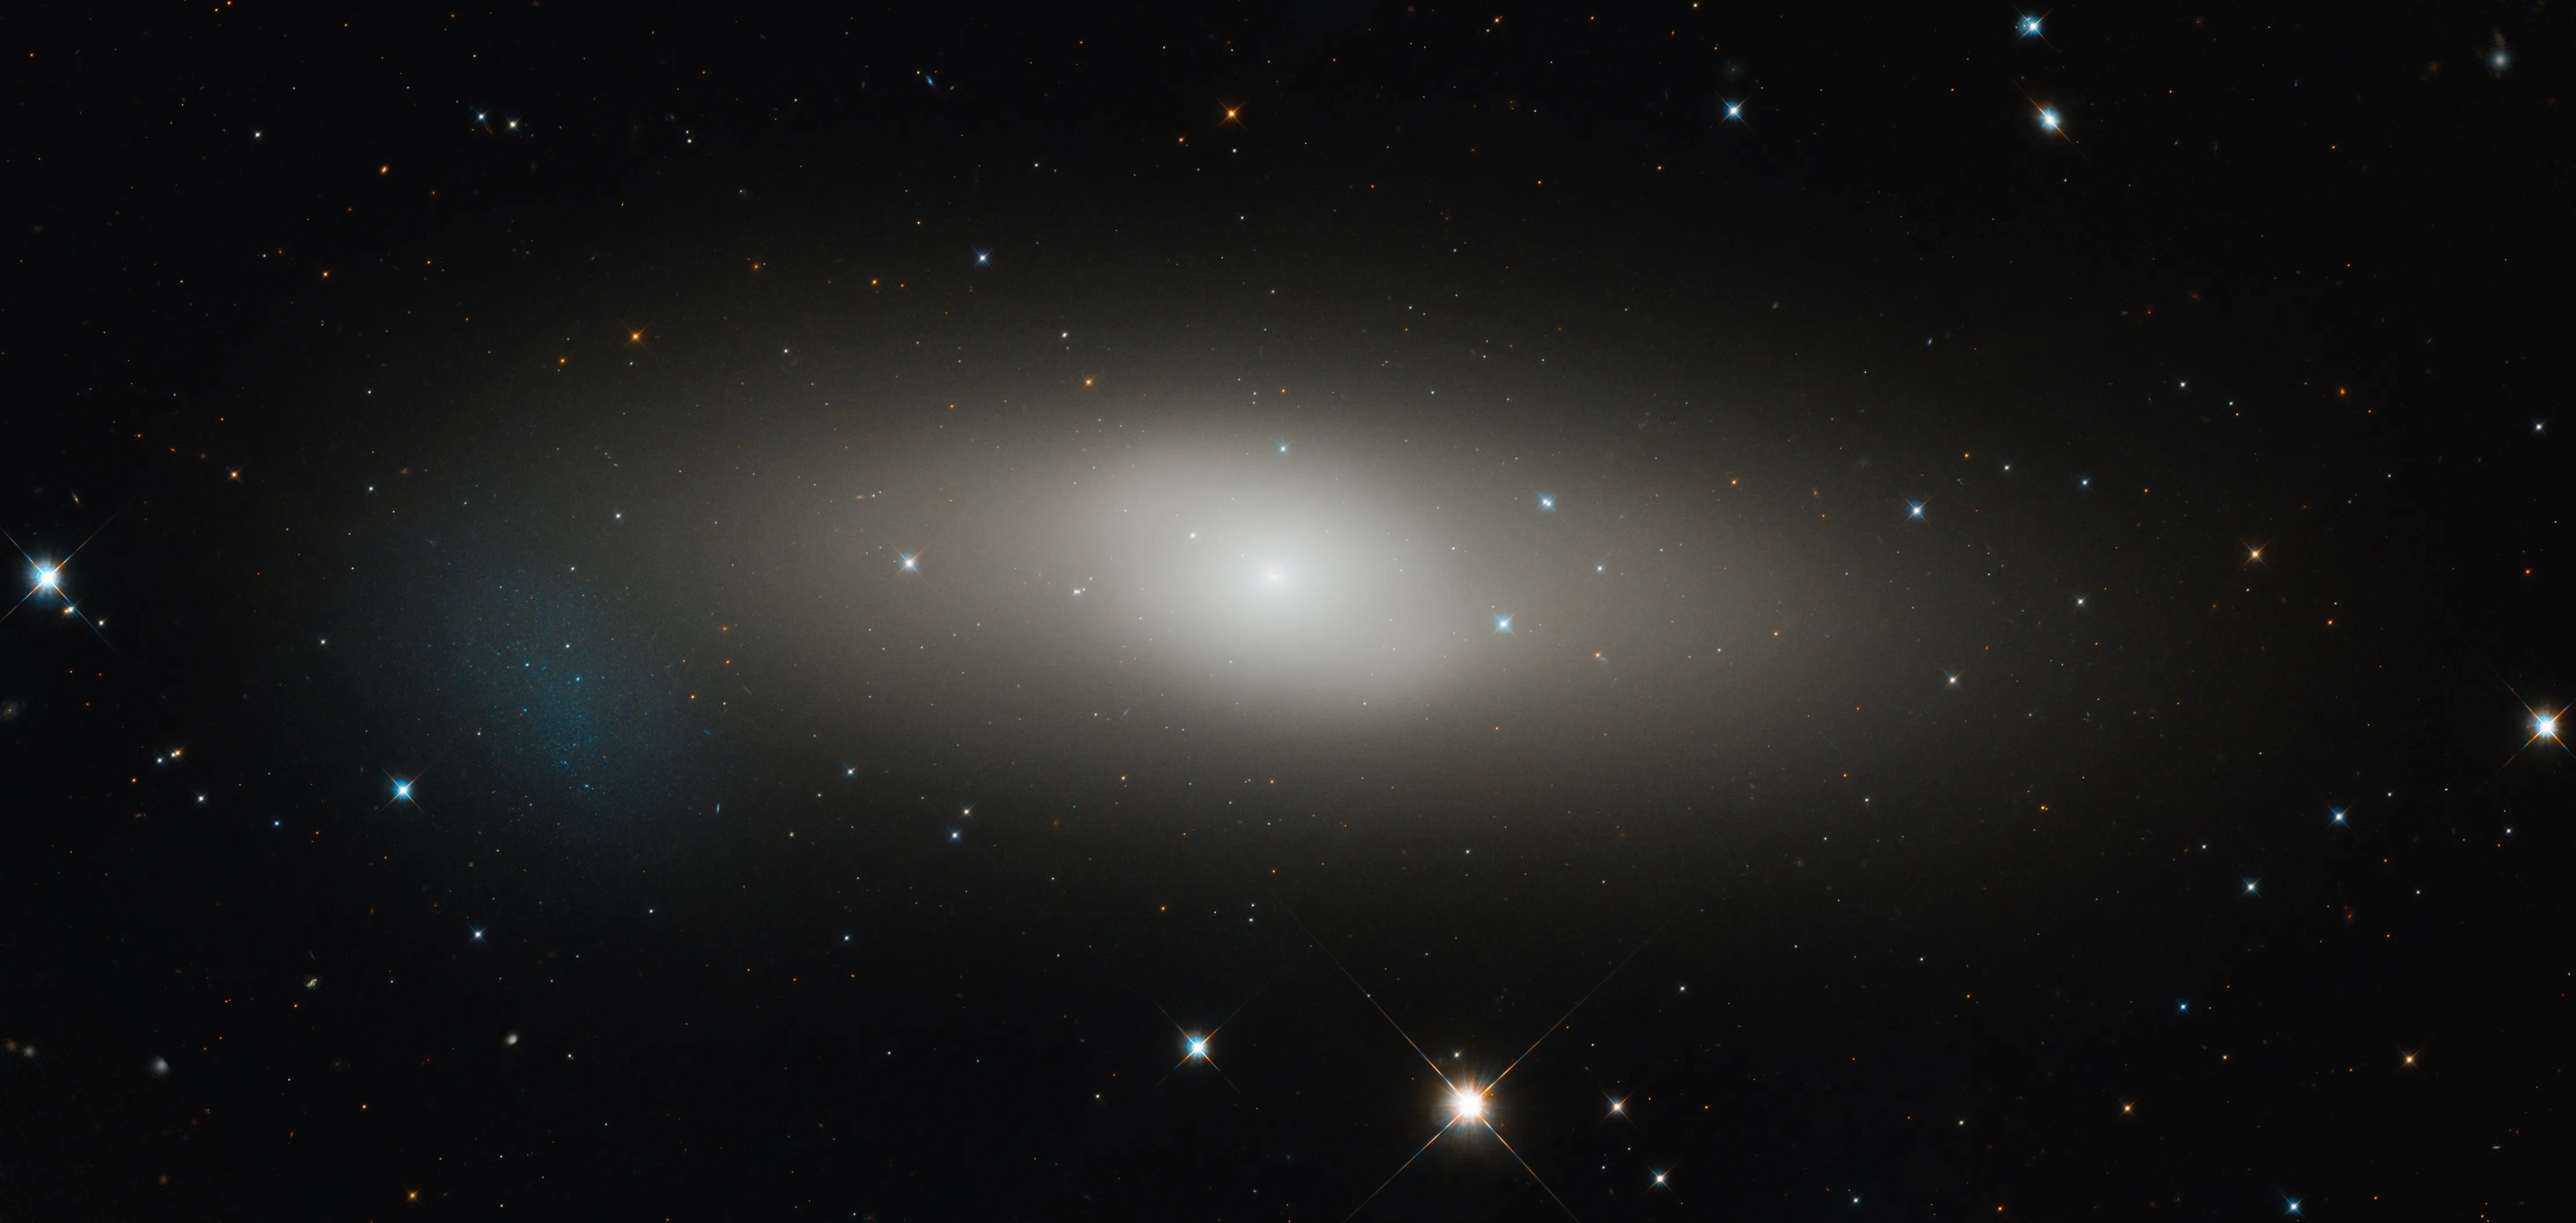 Large lens-like diffuse galaxy with bright core. a cloud of blue gas and stars on its lower left edge